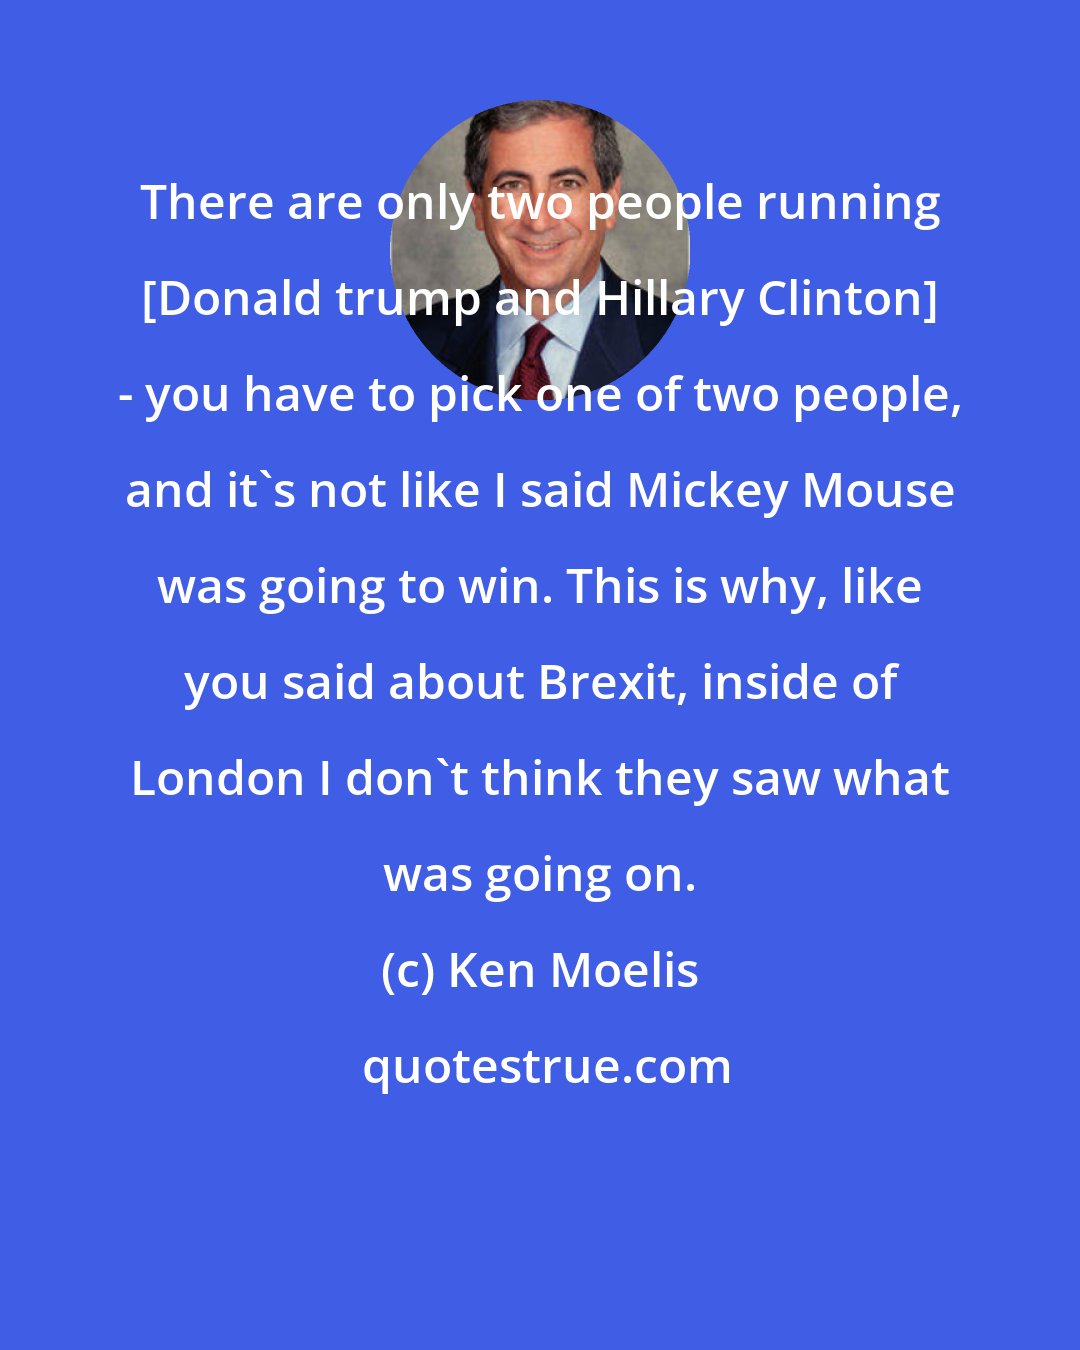 Ken Moelis: There are only two people running [Donald trump and Hillary Clinton] - you have to pick one of two people, and it's not like I said Mickey Mouse was going to win. This is why, like you said about Brexit, inside of London I don't think they saw what was going on.